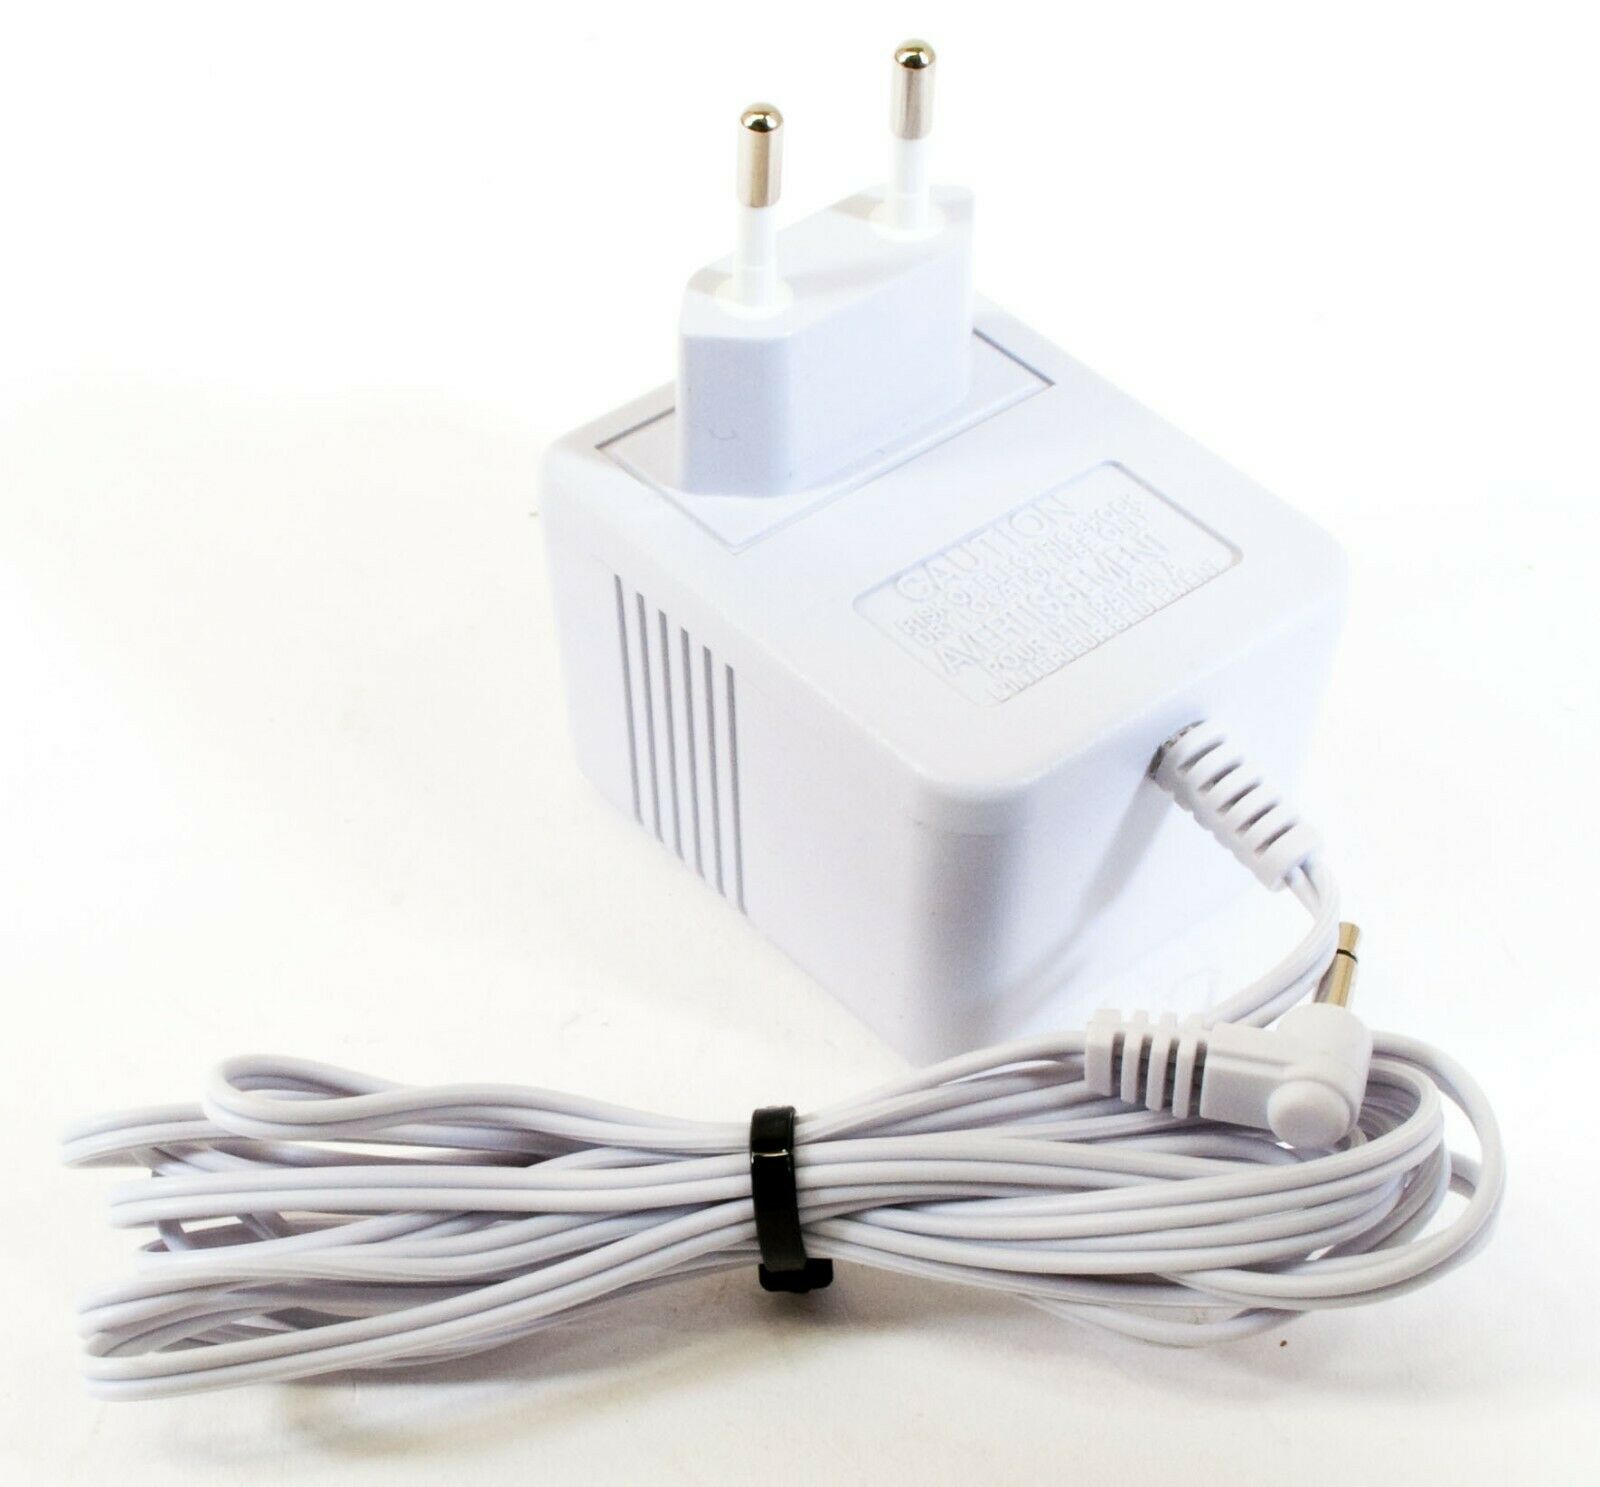 Multi Win MWG-090050D AC Adapter 9V 500mA Original Power Supply Output Current: 500 mA Voltage: 9